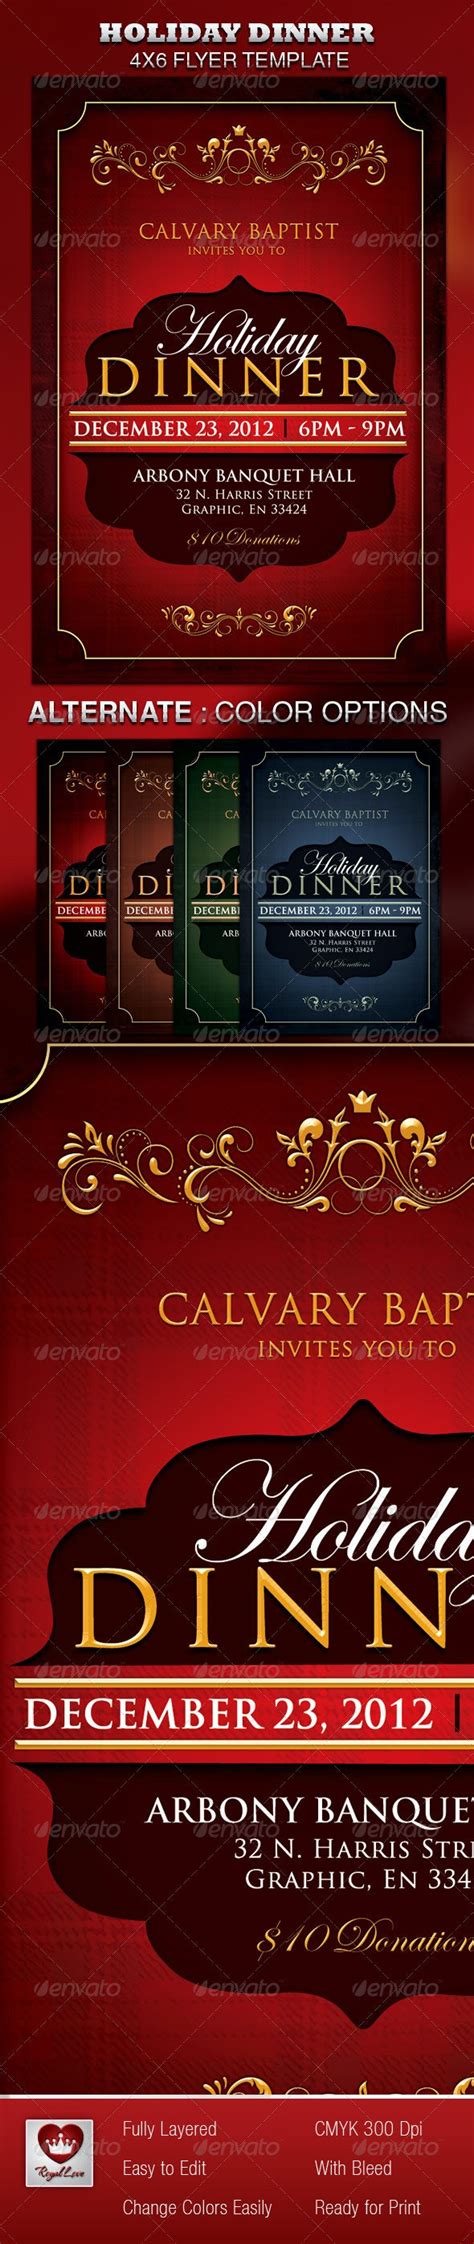 Holiday Dinner Church Flyer Print Templates Graphicriver